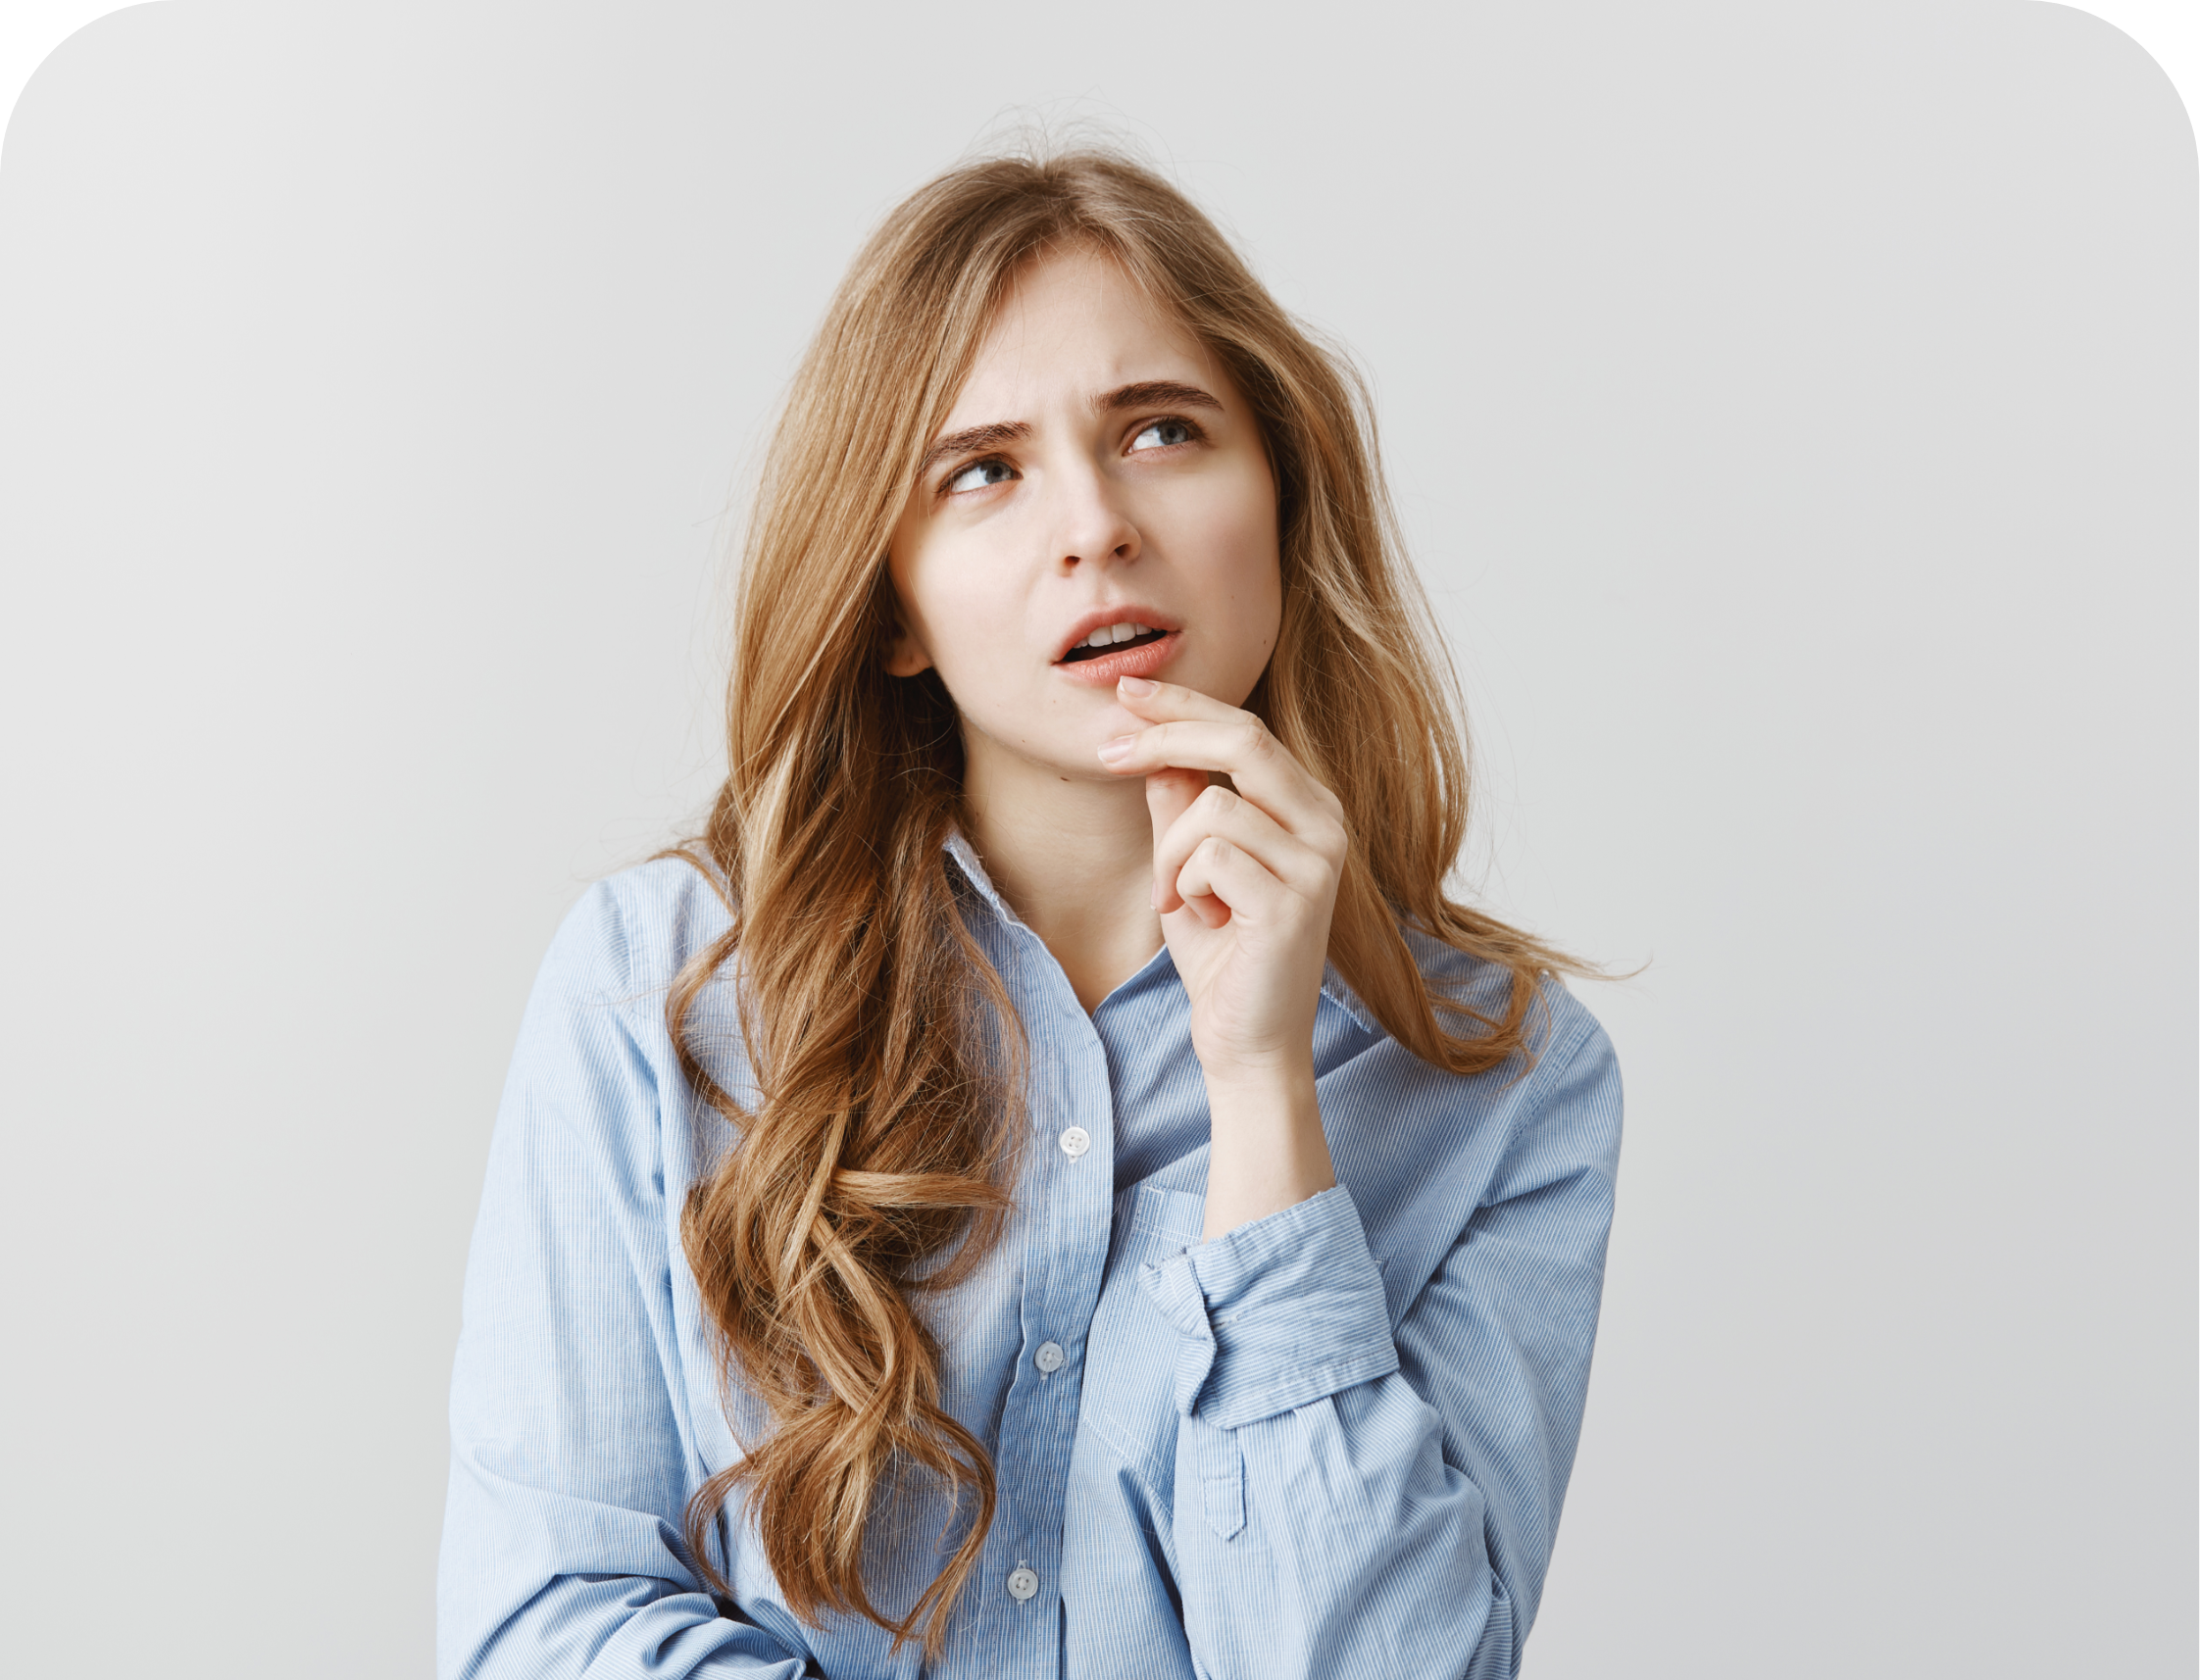 woman with hand on her chin thinking while looking off to the side